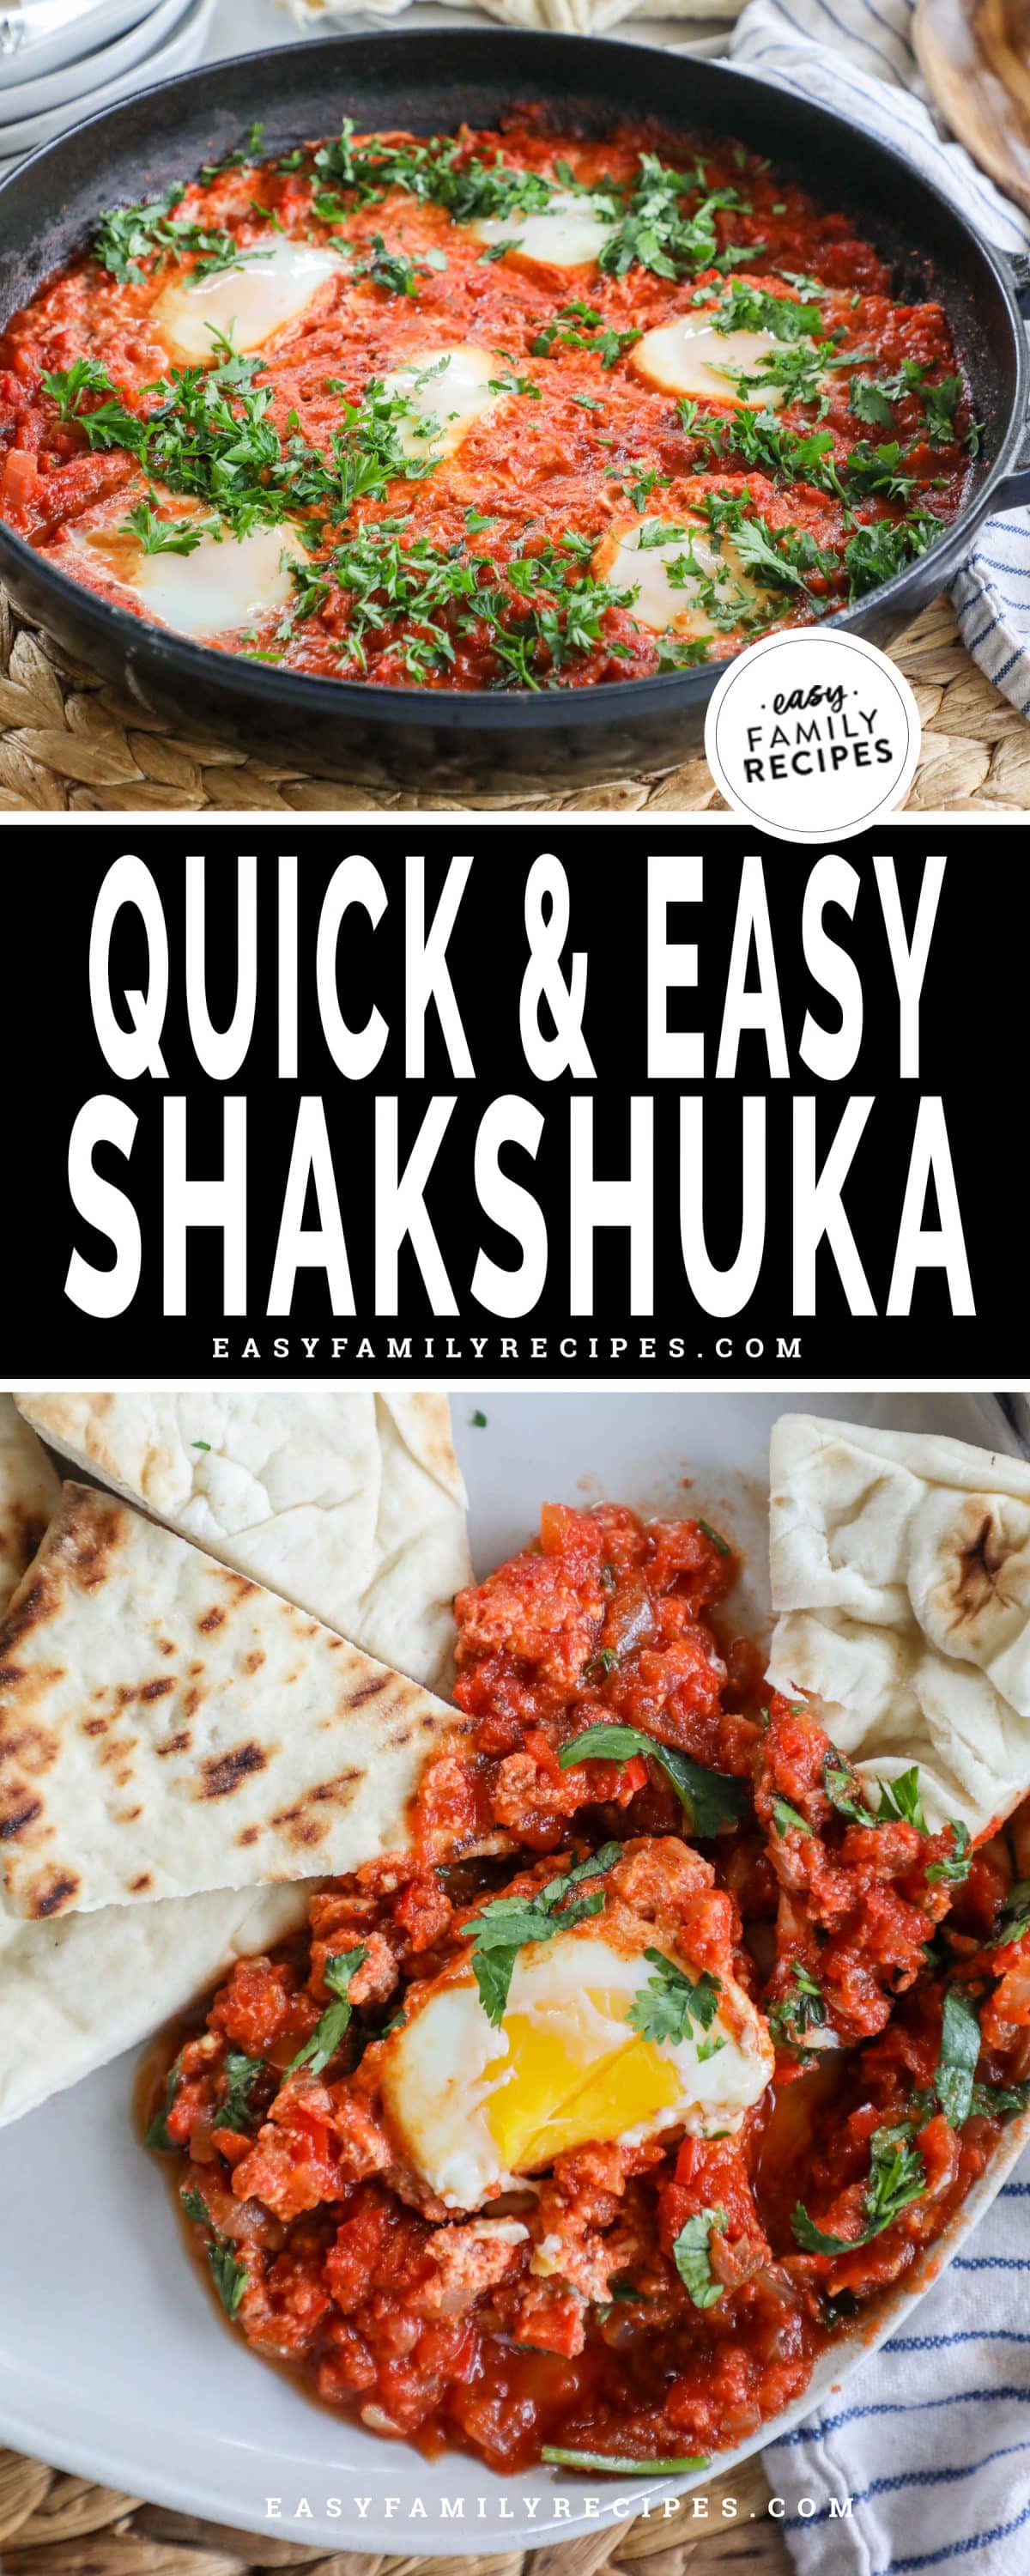 Easy Shakshuka breakfast served on a plate with pita